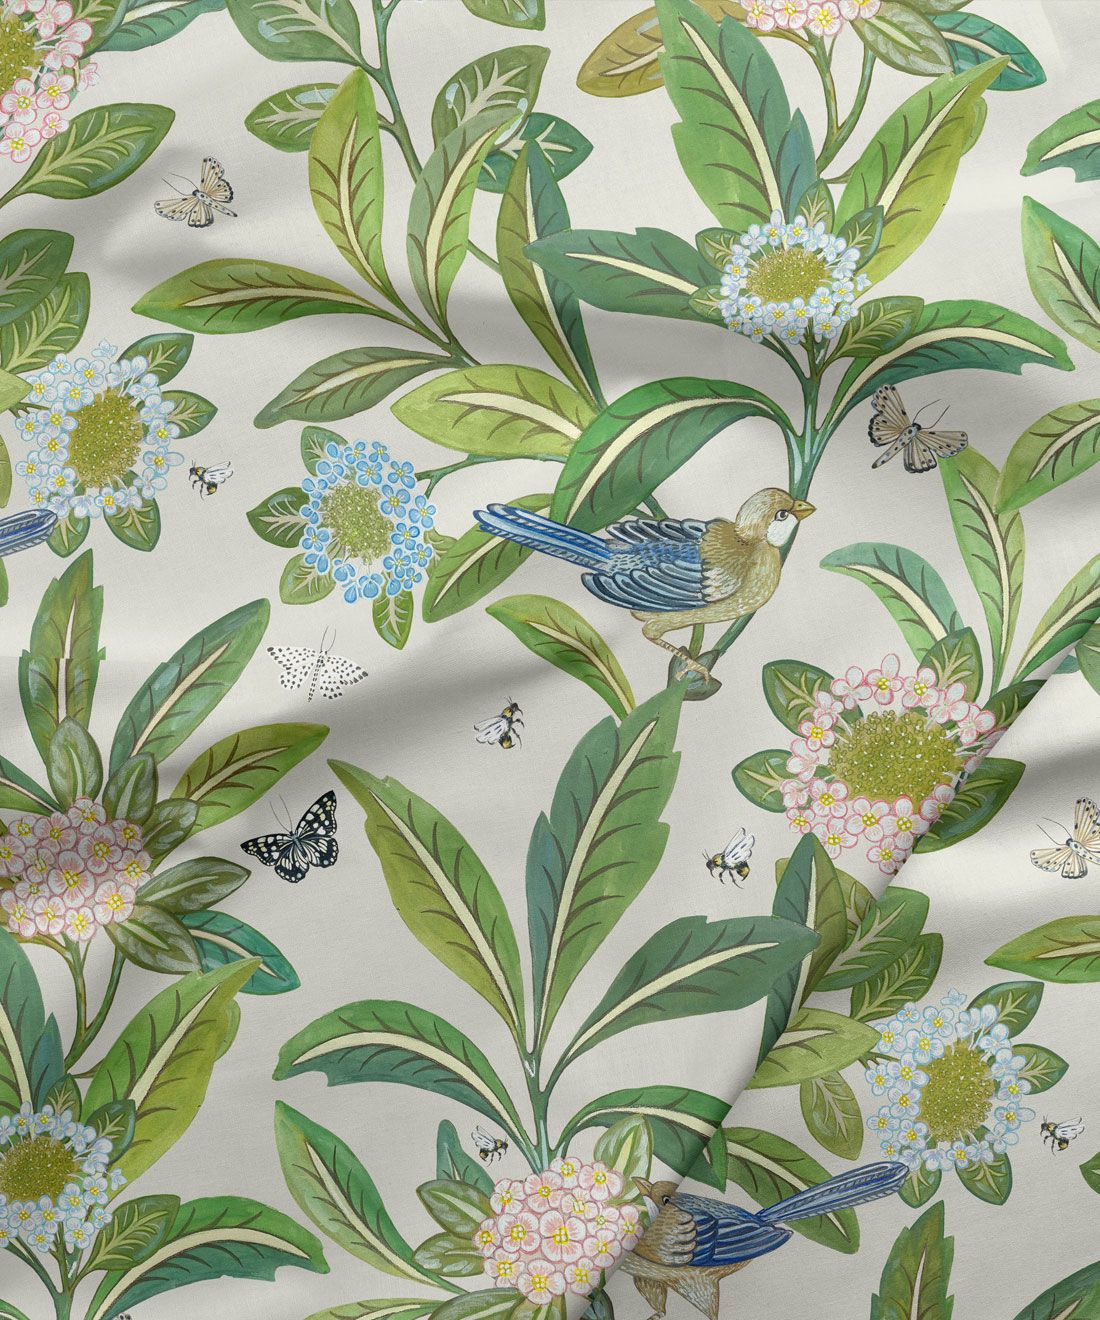 Summer Garden Fabric • Bethany Linz • Bird and Plant Fabric • Ivory Upholstery Fabric